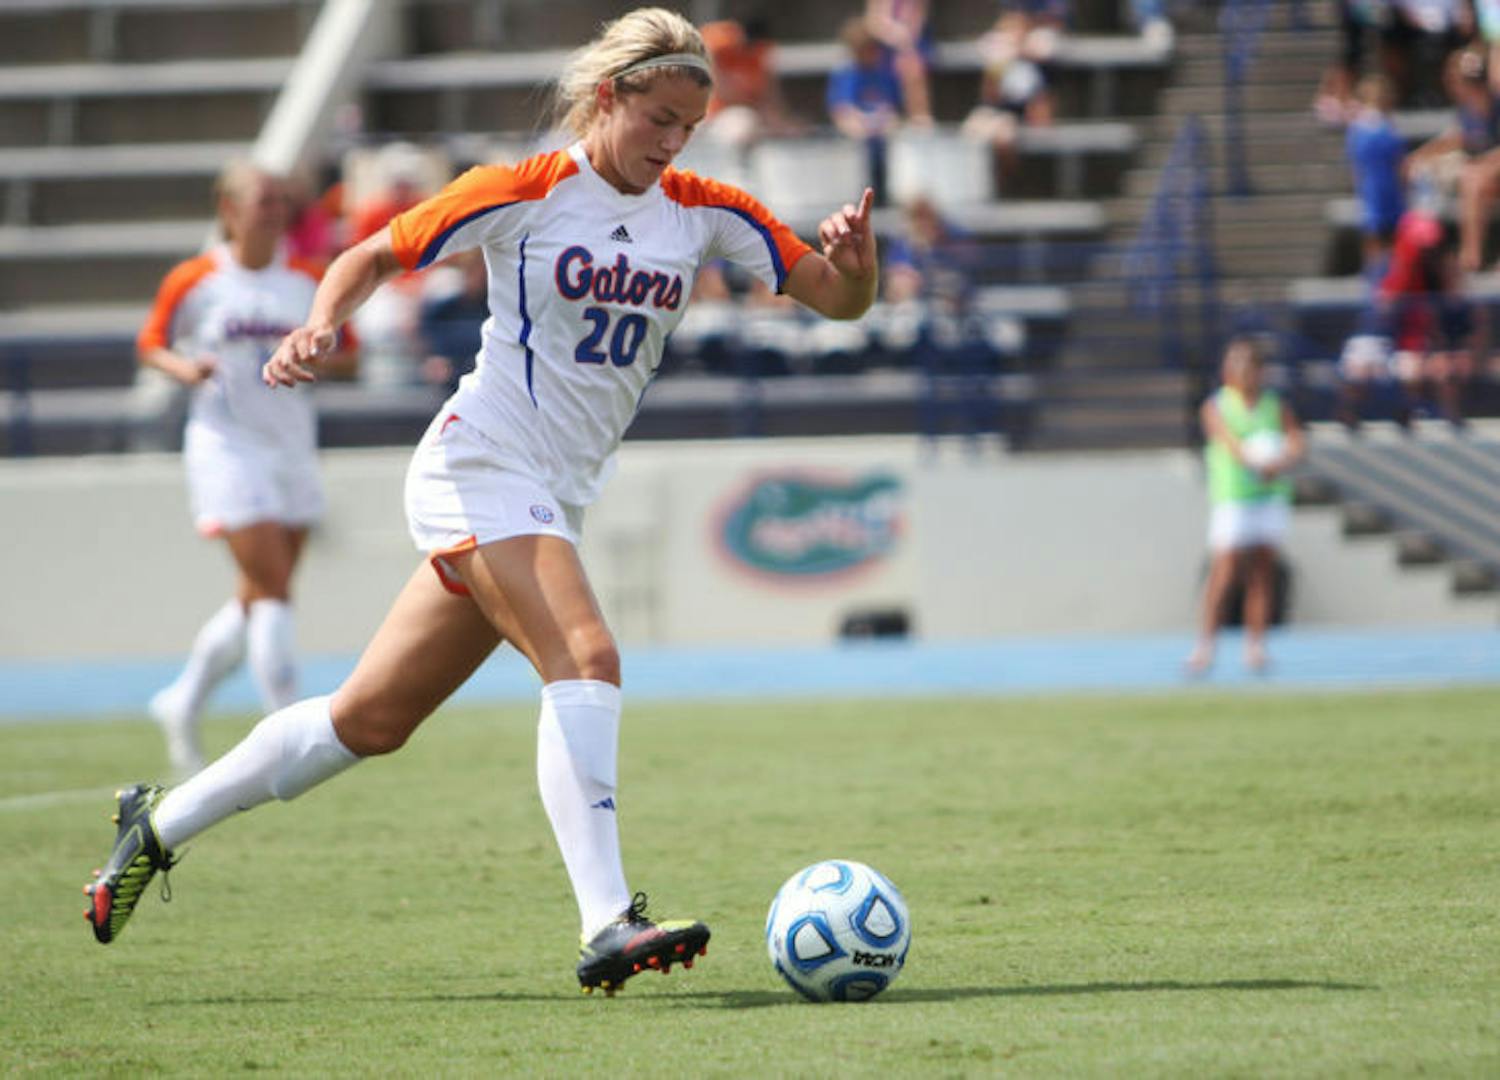 Centerback Christen Westphal dribbles the ball down the field against Arkansas on Sept. 30 at James G. Pressly Stadium. Westphal is one of Florida’s six returning starters from last season.